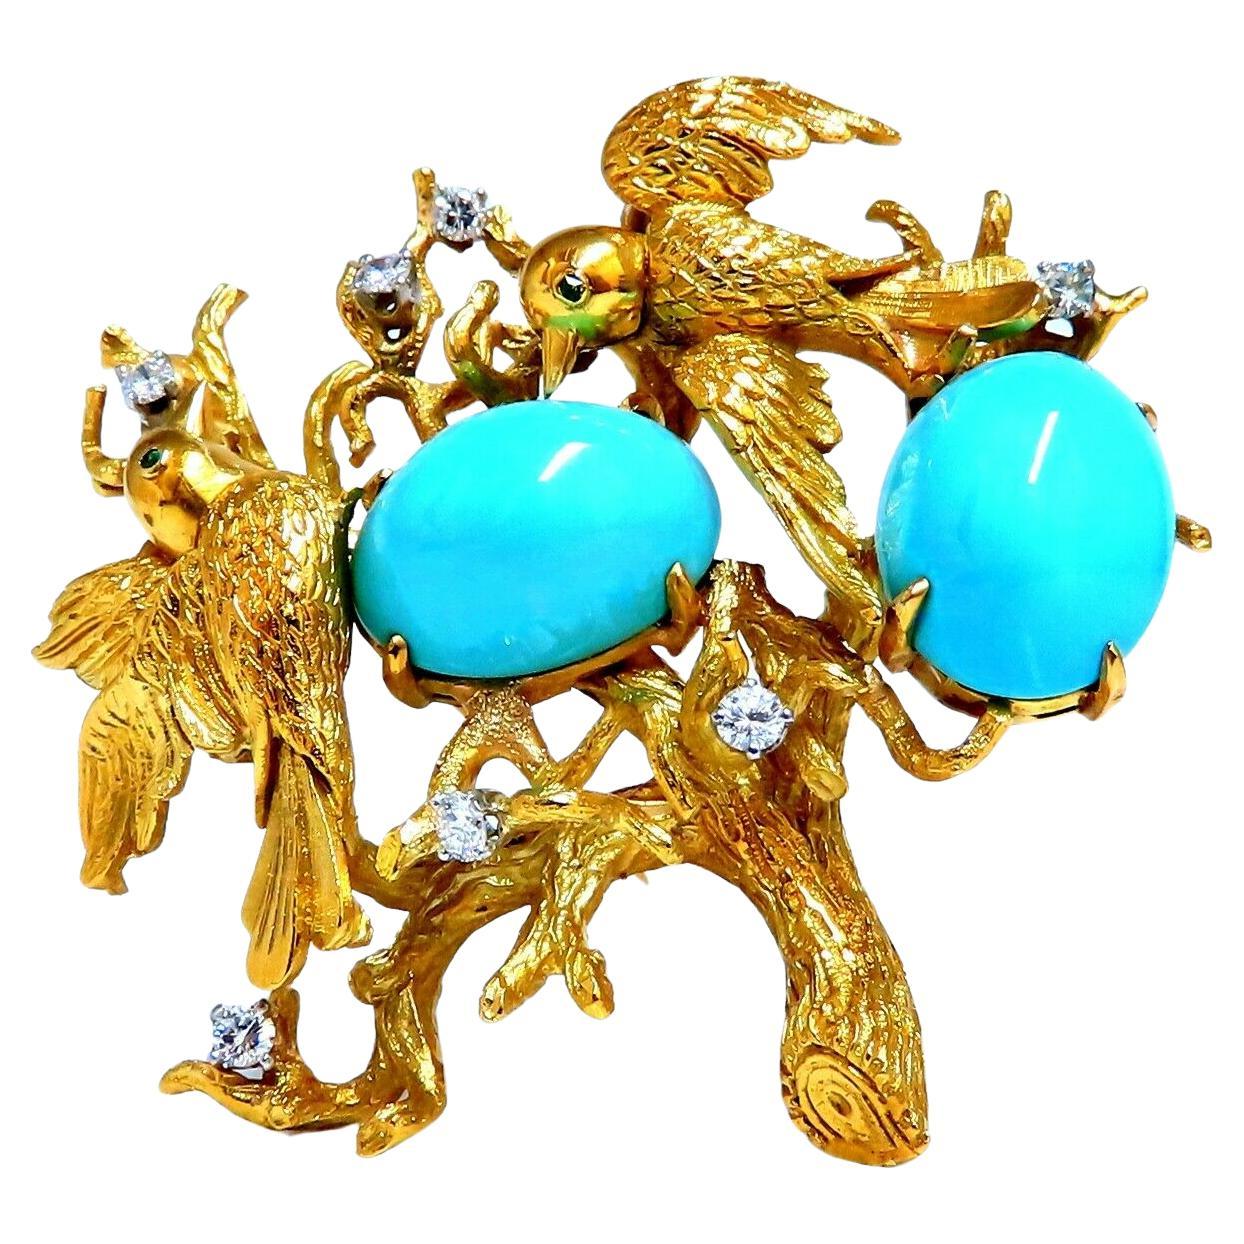 Vintage Bird Nest Eggs 20ct Turquoise 18kt Brooch High Intricate For Sale